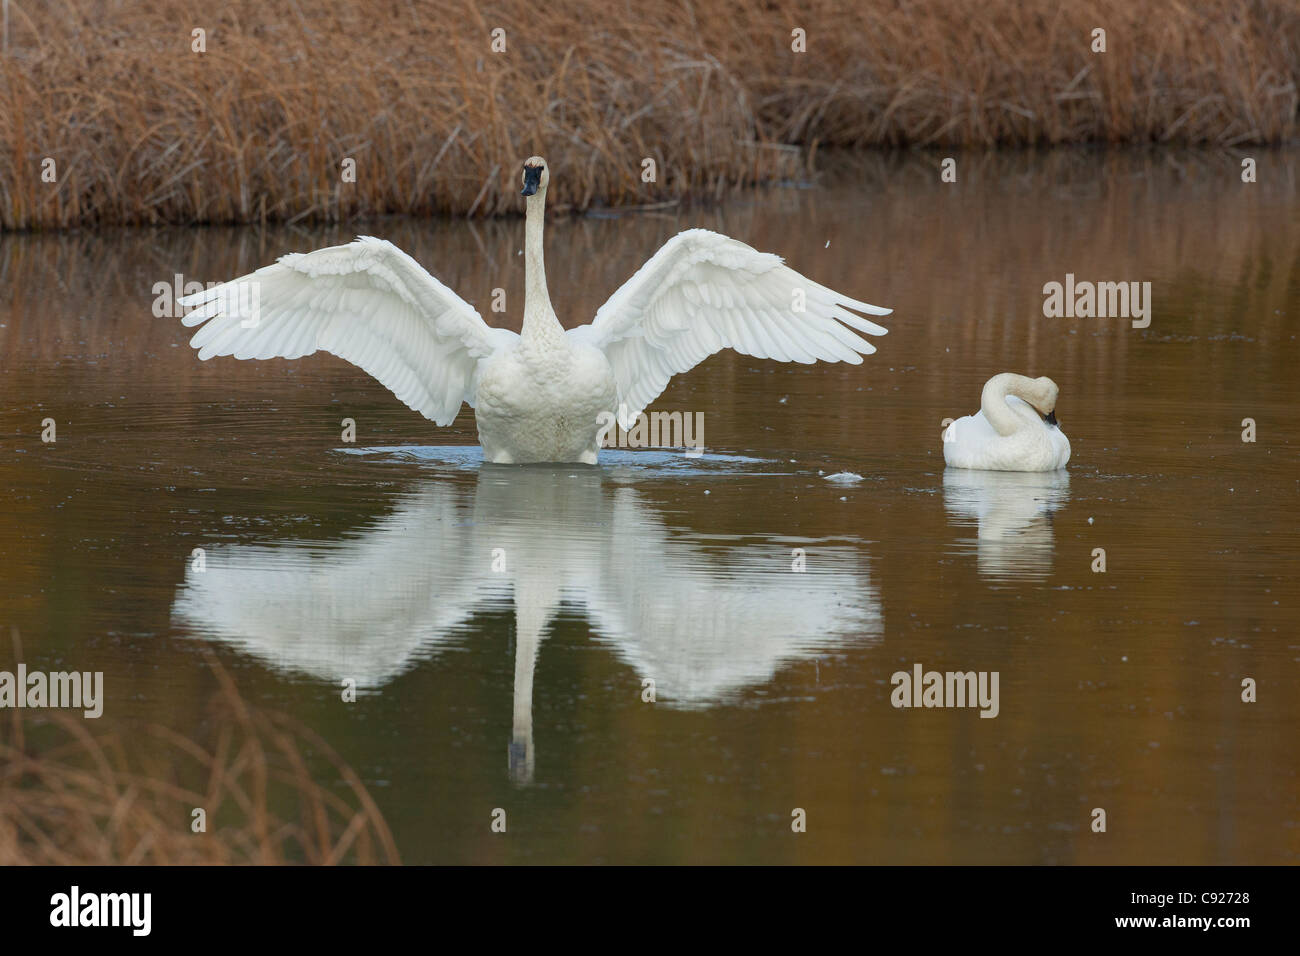 A Trumpeter swan flaps its wings while its mate sits at its side, Potter Marsh, Anchorage, Southcentral Alaska, Autumn Stock Photo